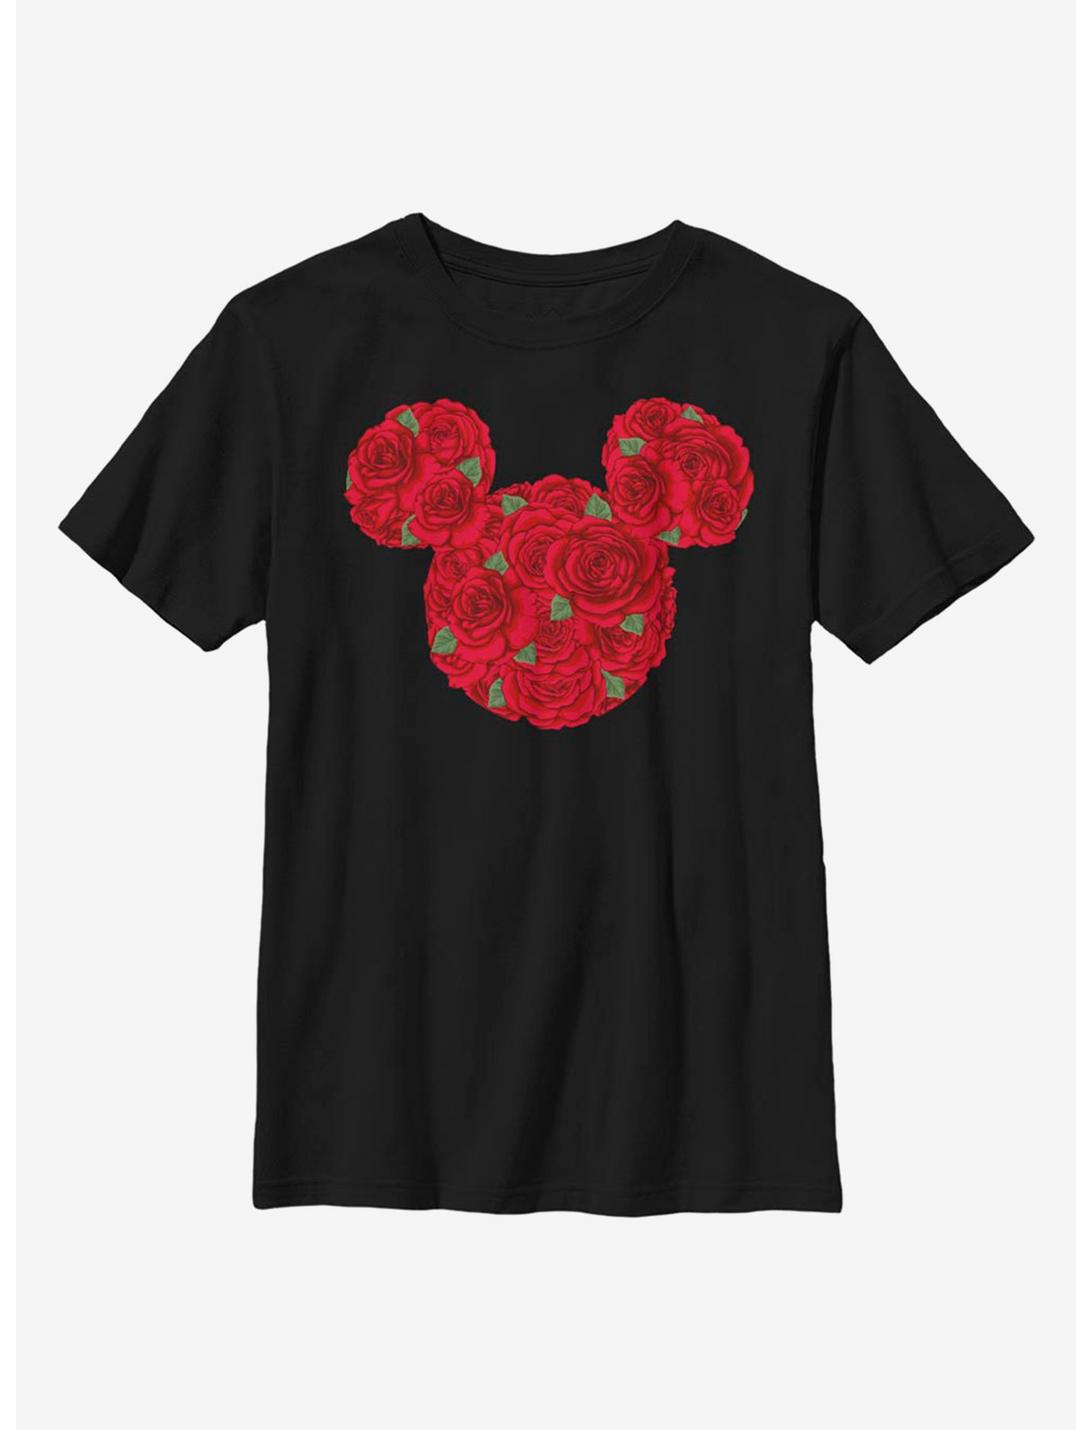 Disney Minnie Mouse Mickey Mouse Roses Youth T-Shirt, BLACK, hi-res